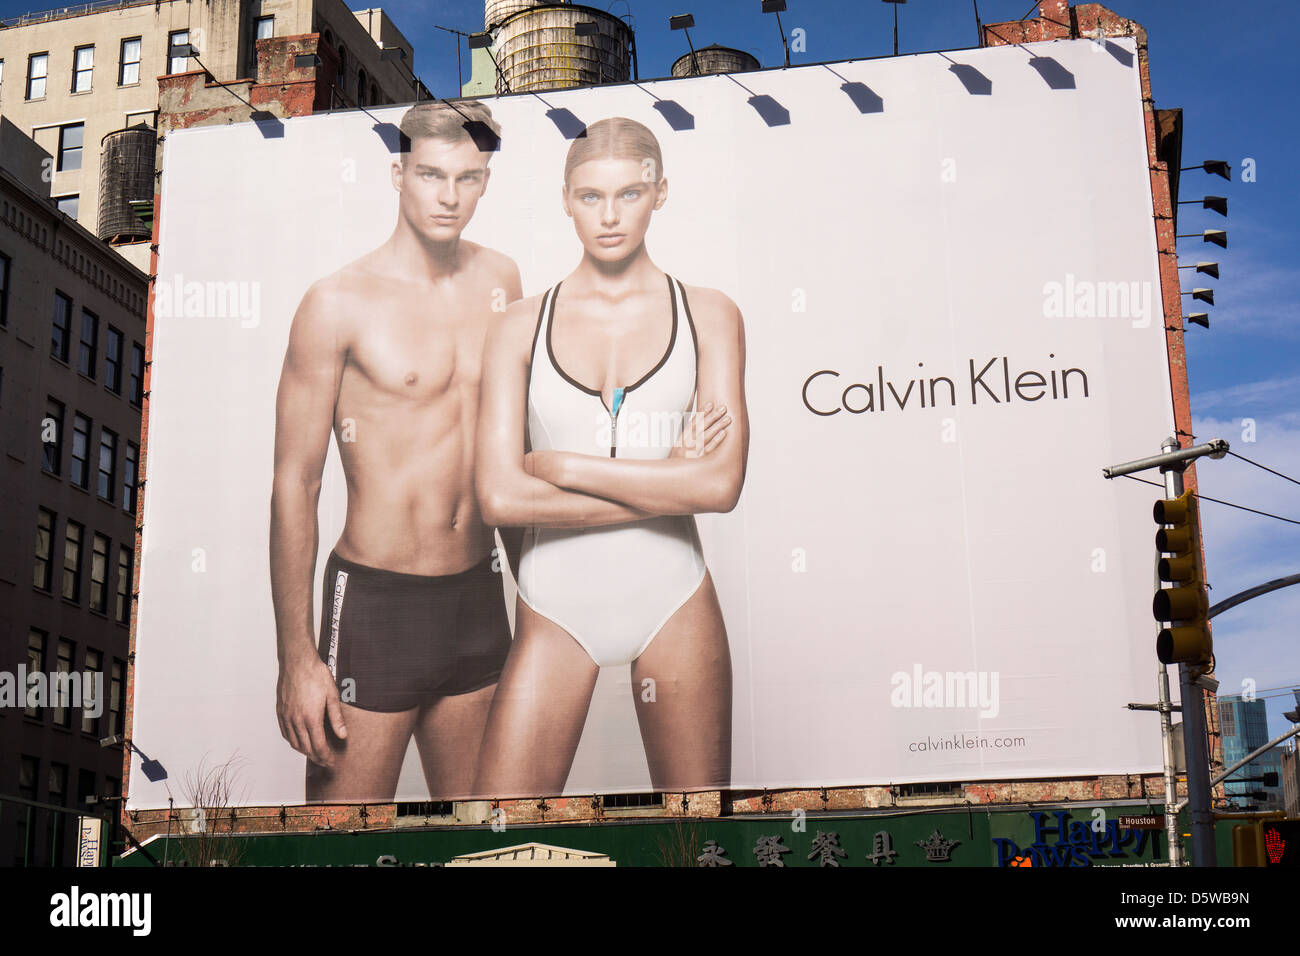 A Calvin Klein billboard advertises his line of swimming suits in the Soho  neighborhood of New York Stock Photo - Alamy